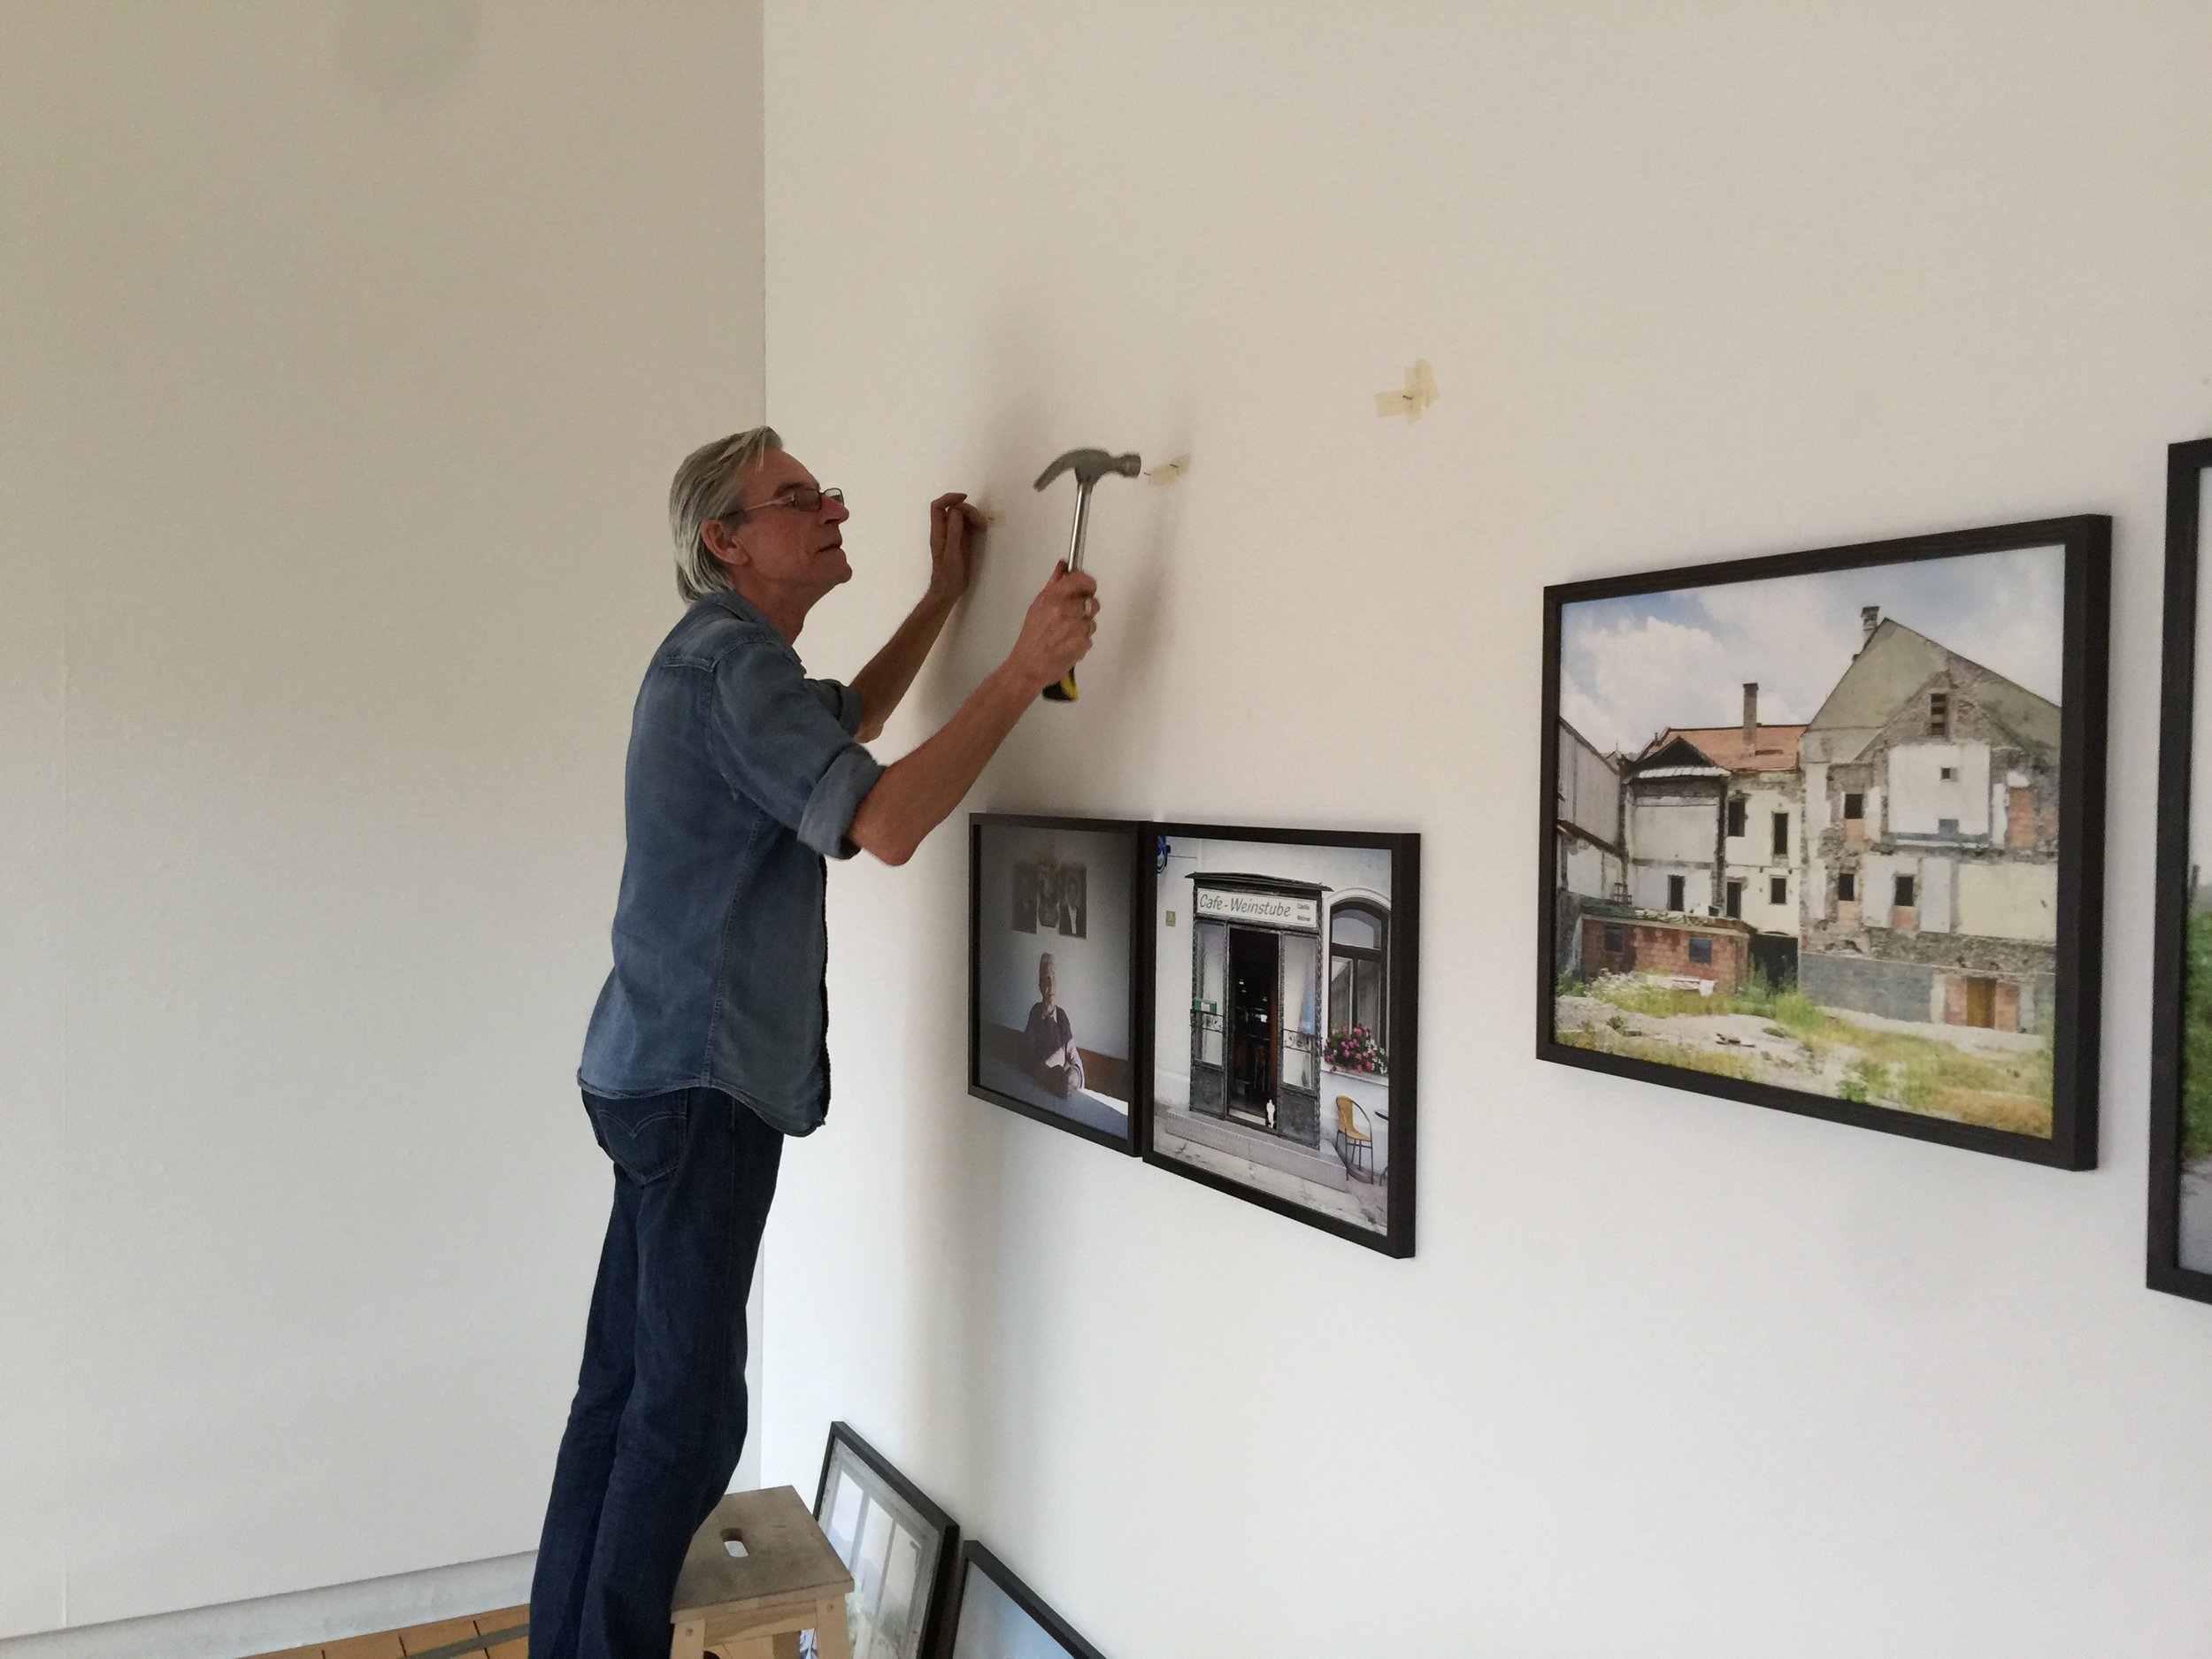  Pete Smyth installing “The Body Politic” exhibition 